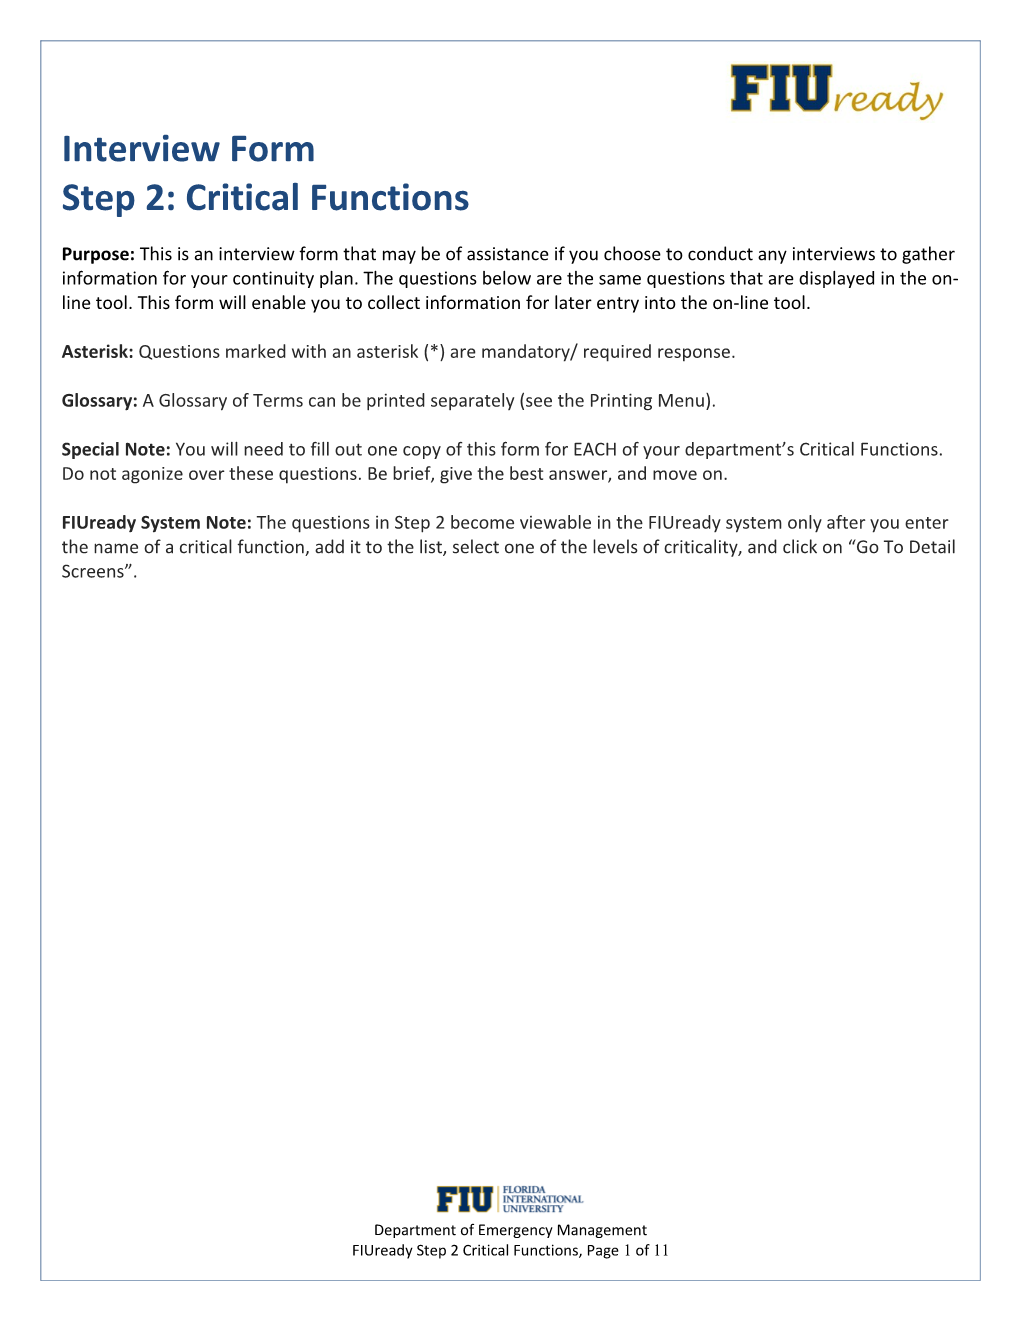 Step 2: Critical Functions